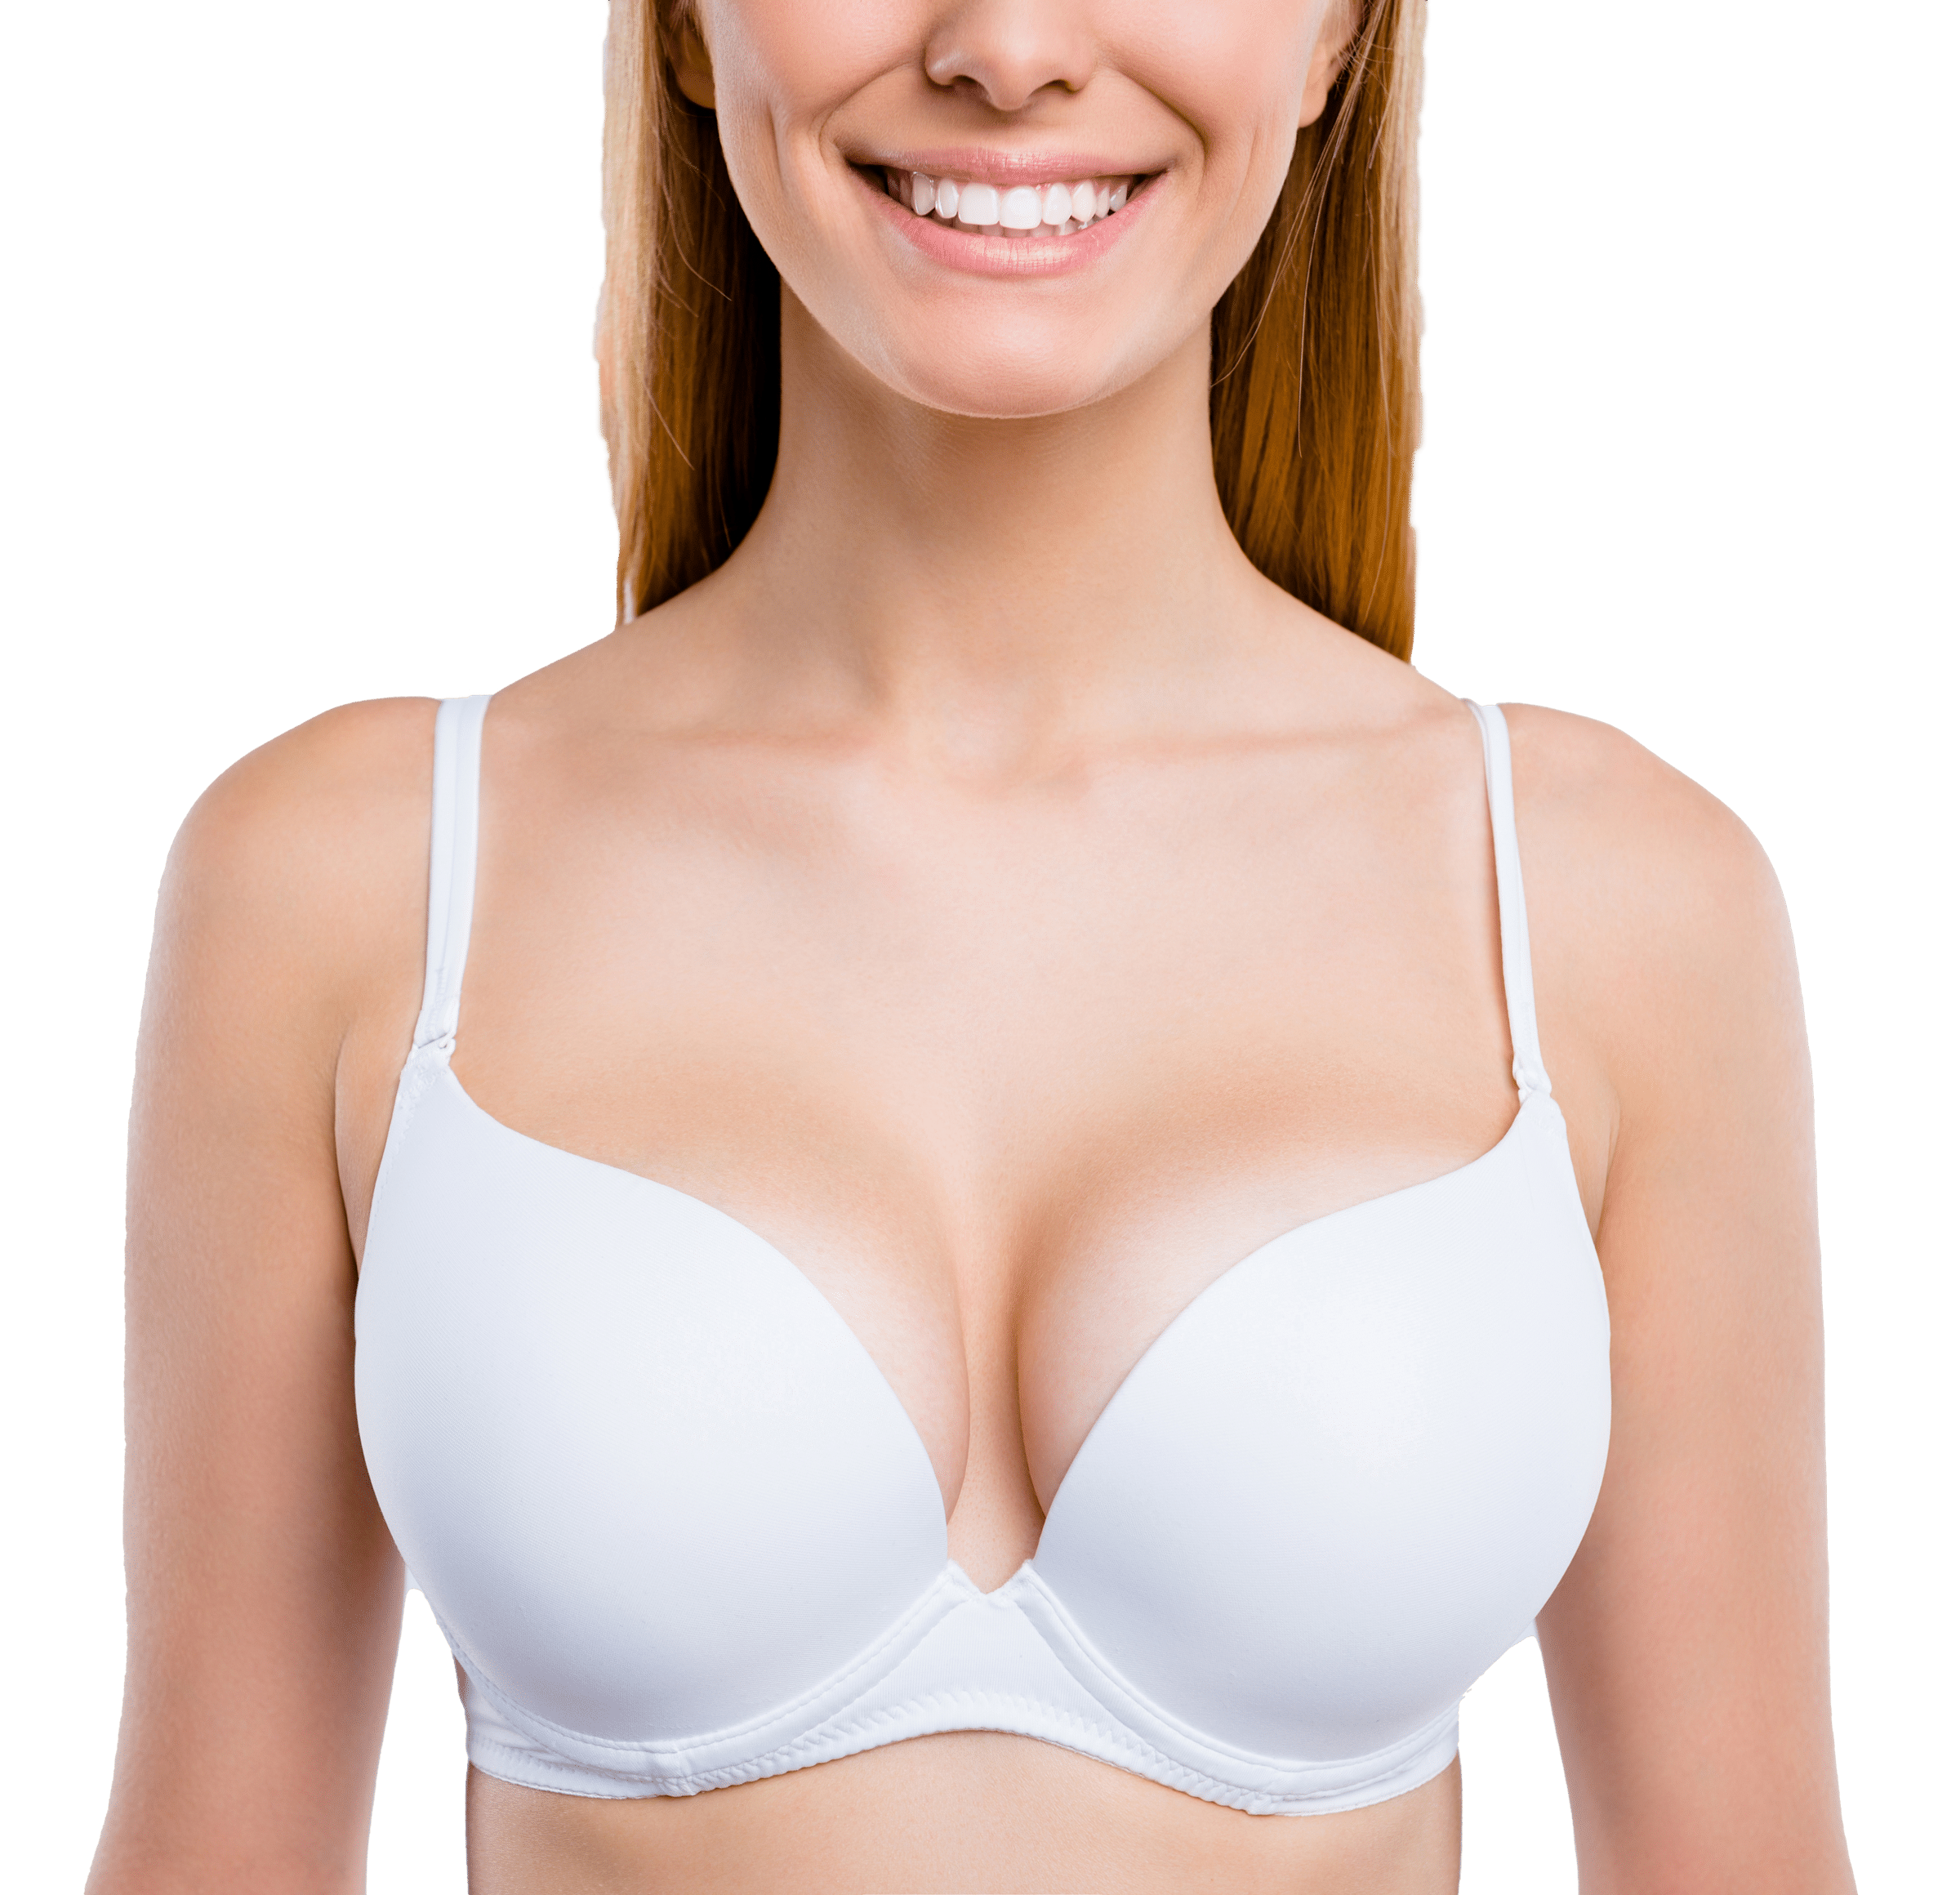 Causes of Small Breasts and Herbal Breast Enhancement Pills